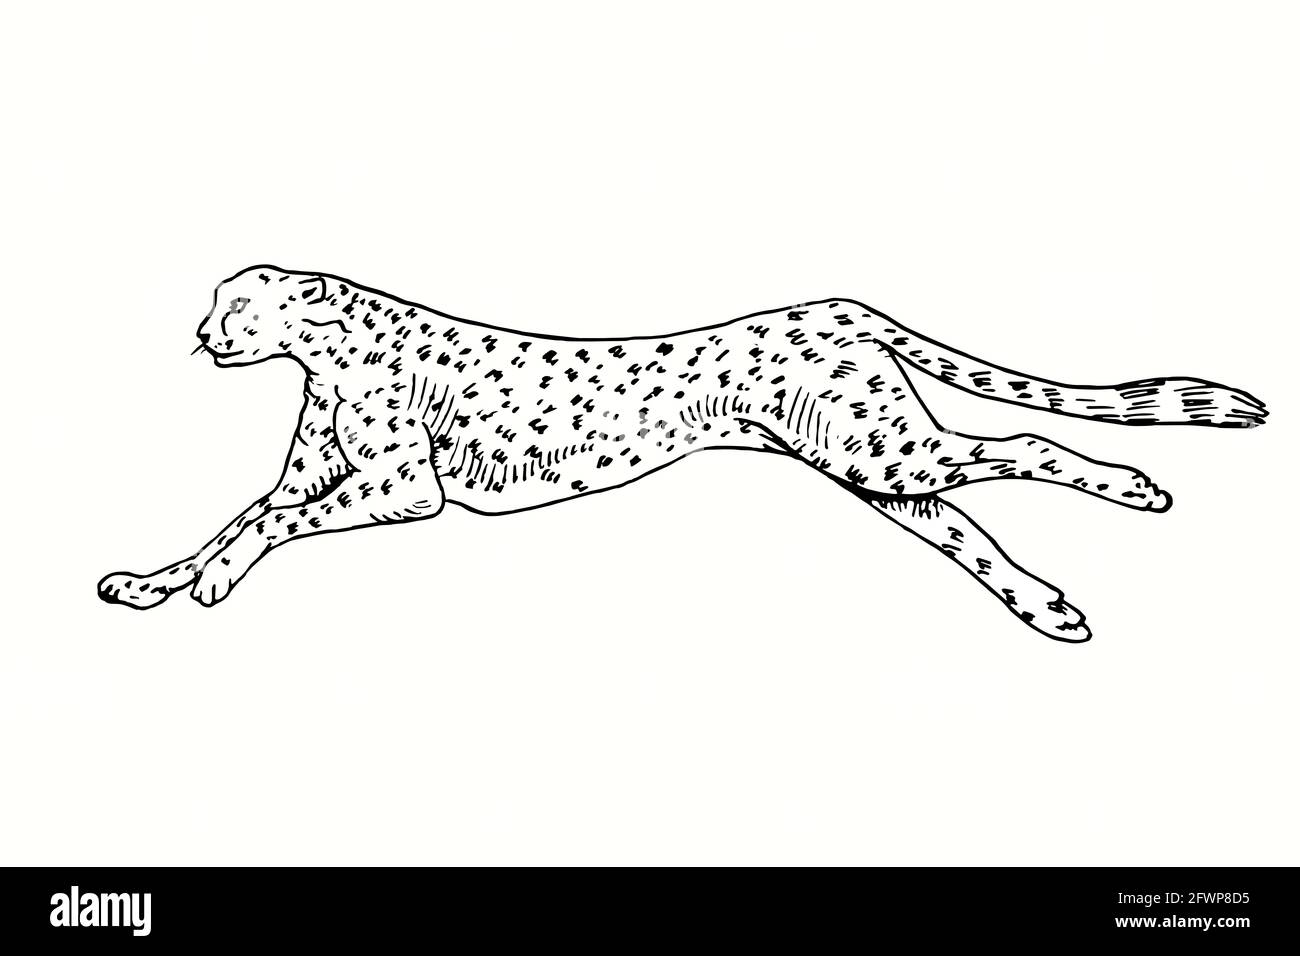 Cheetah running side view. Ink black and white doodle drawing in woodcut style. Stock Photo